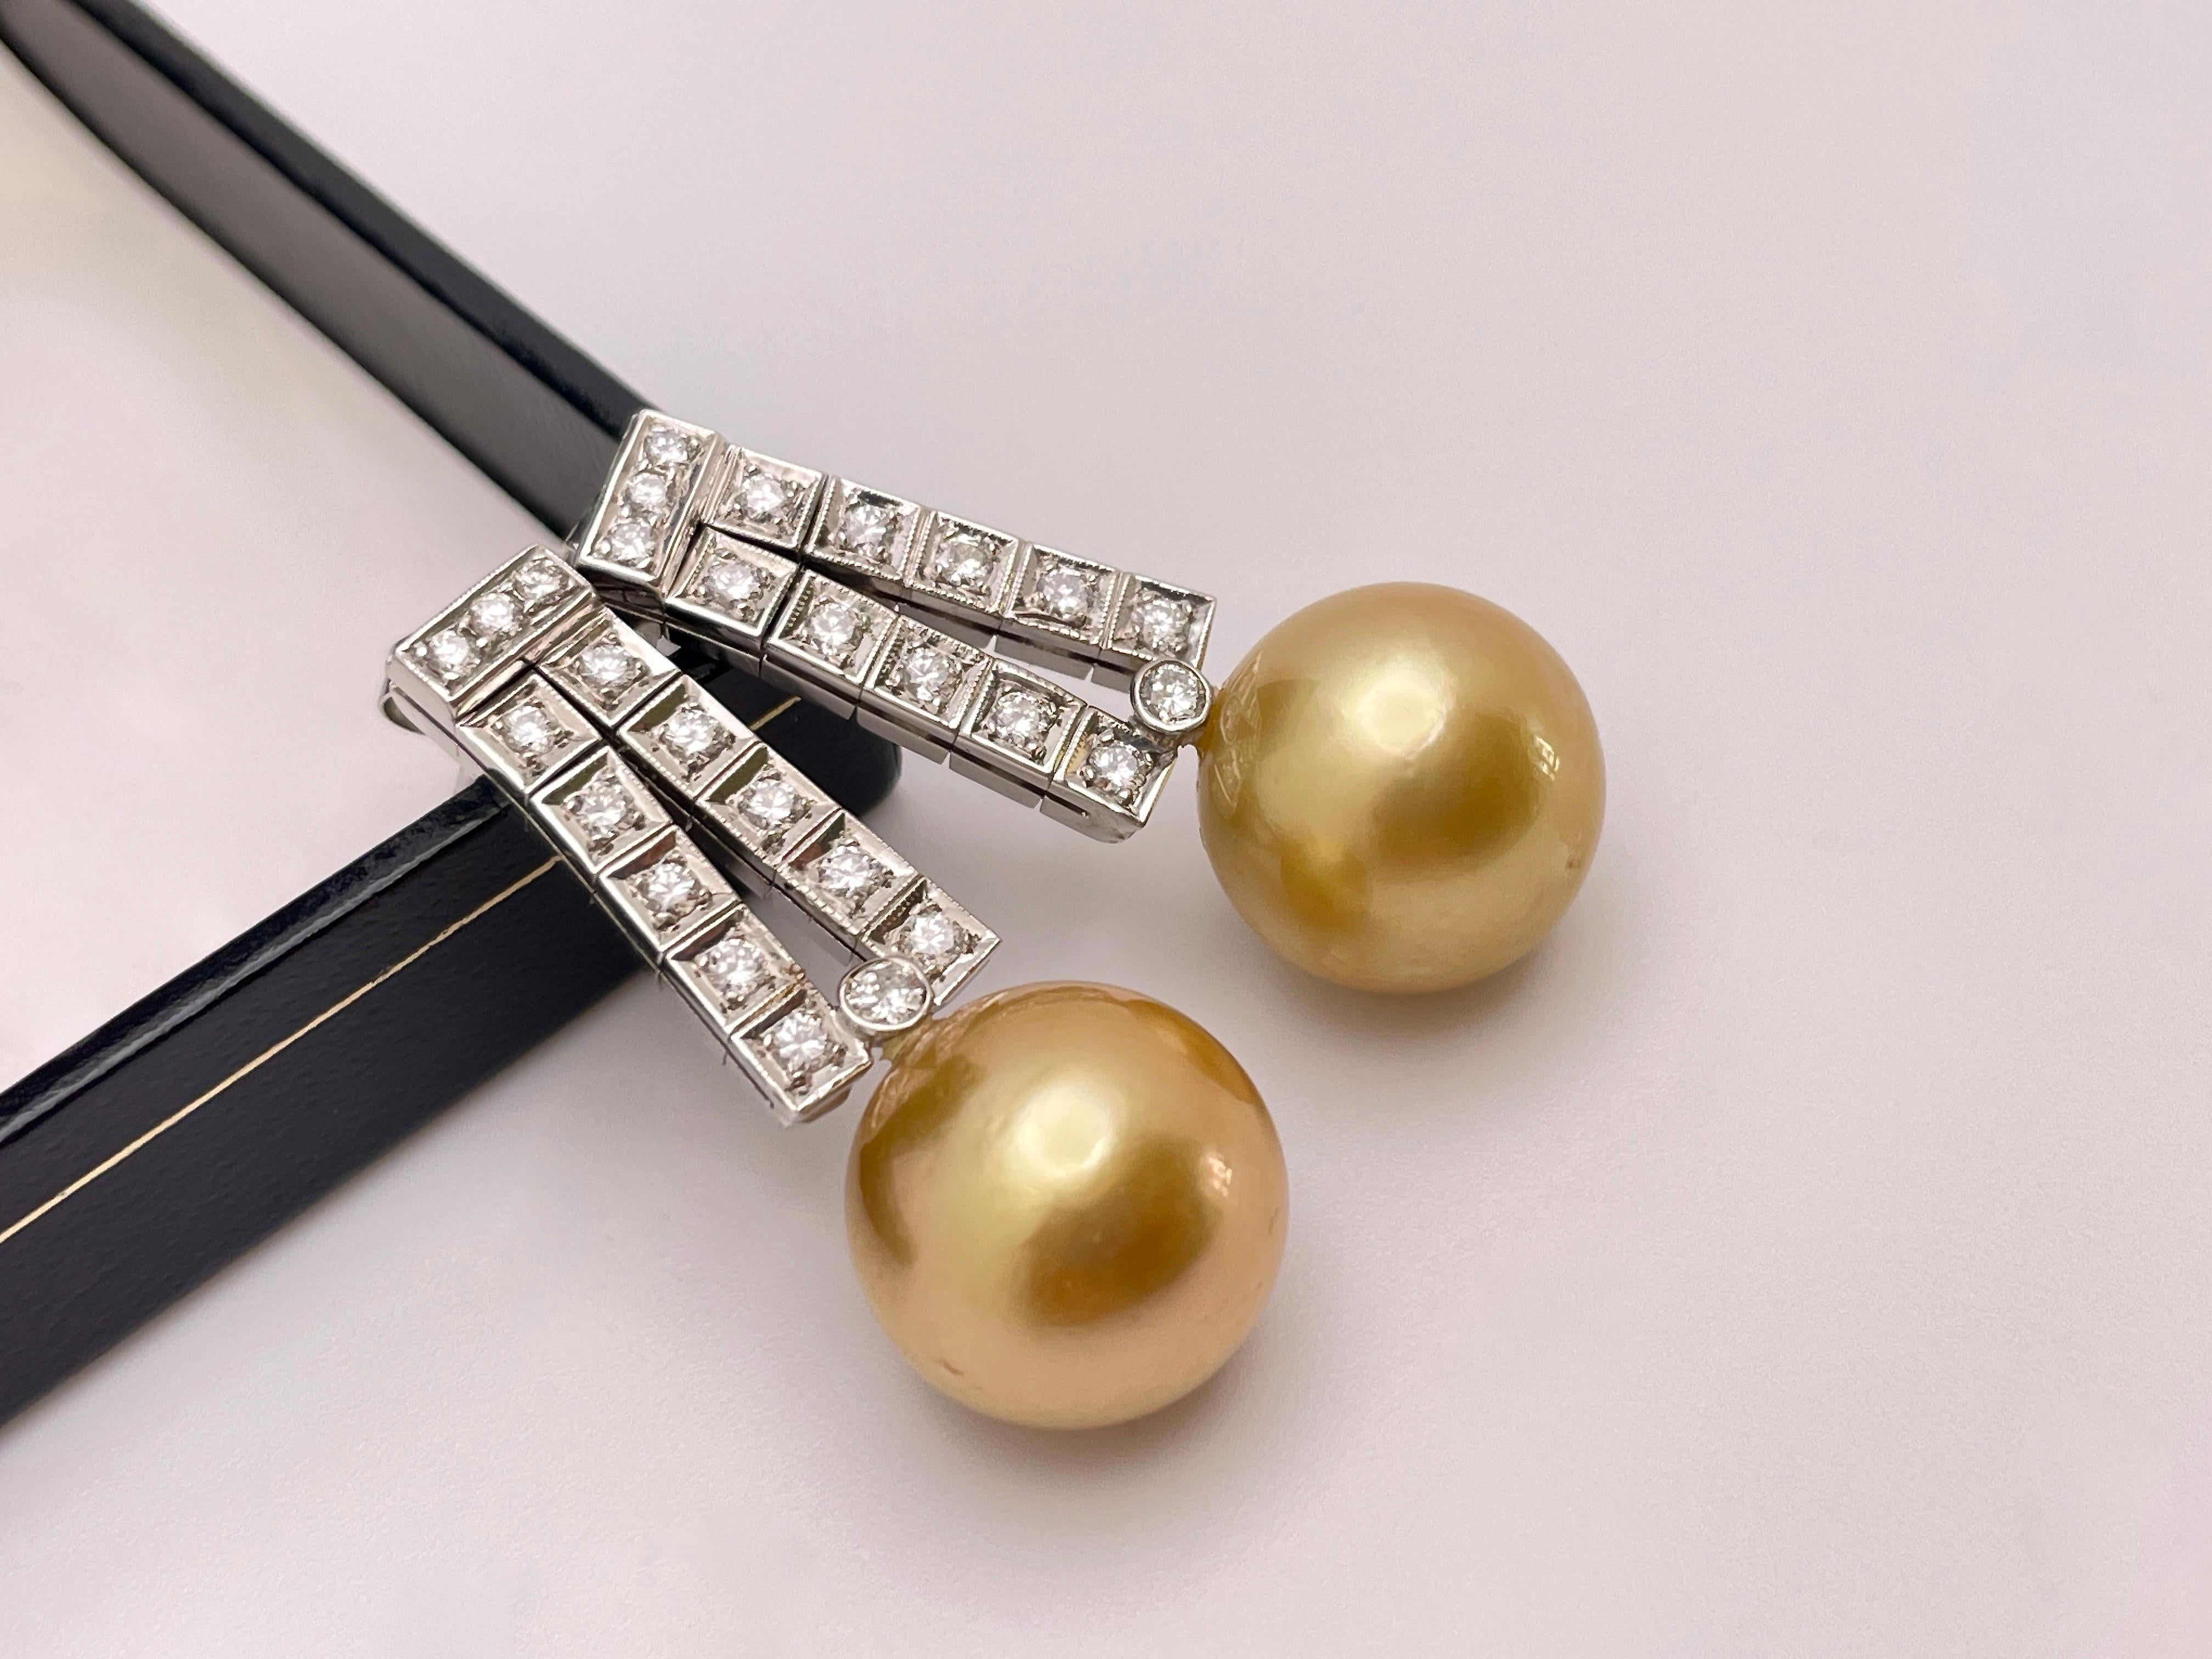 An original pair of 14K white gold diamond and natural yellow Australian pearl drop/dangle earrings. Each pair is set with 14 diamonds weighing approximately 0.50 CT and mounted with a natural yellow 13.30 MM Australian golden pearl. 

Gross Weight